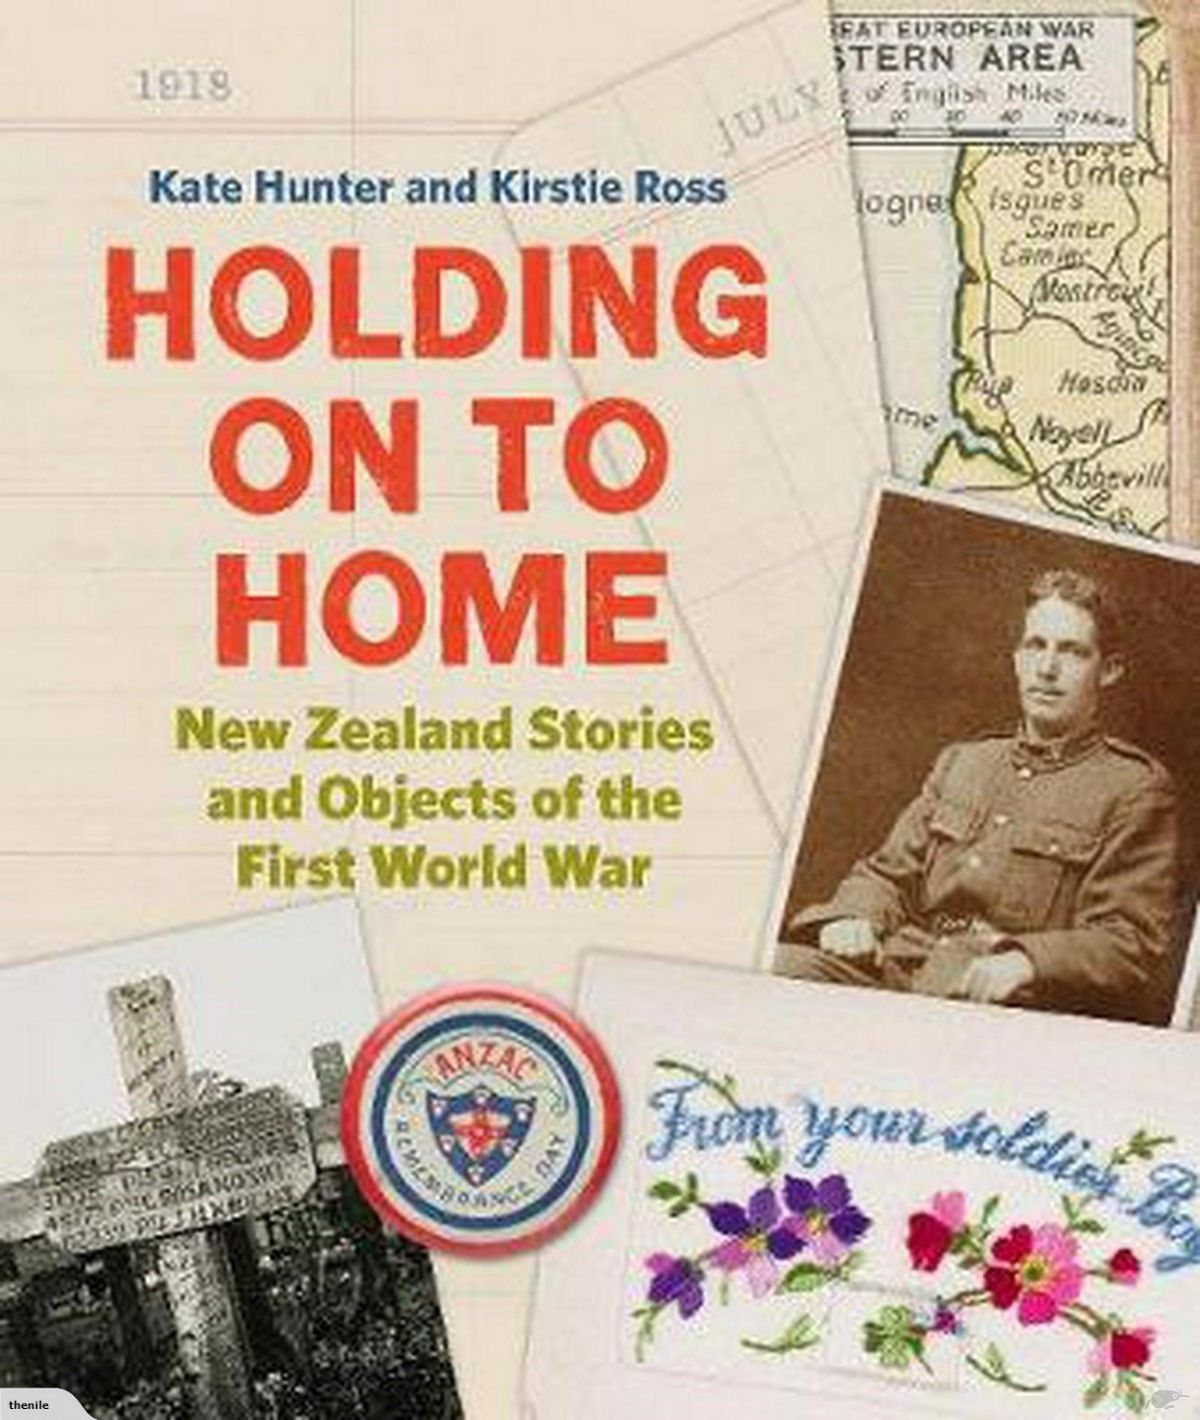 HOLDING ONTO HOME: New Zealand Stories and Objects of The 1st World War